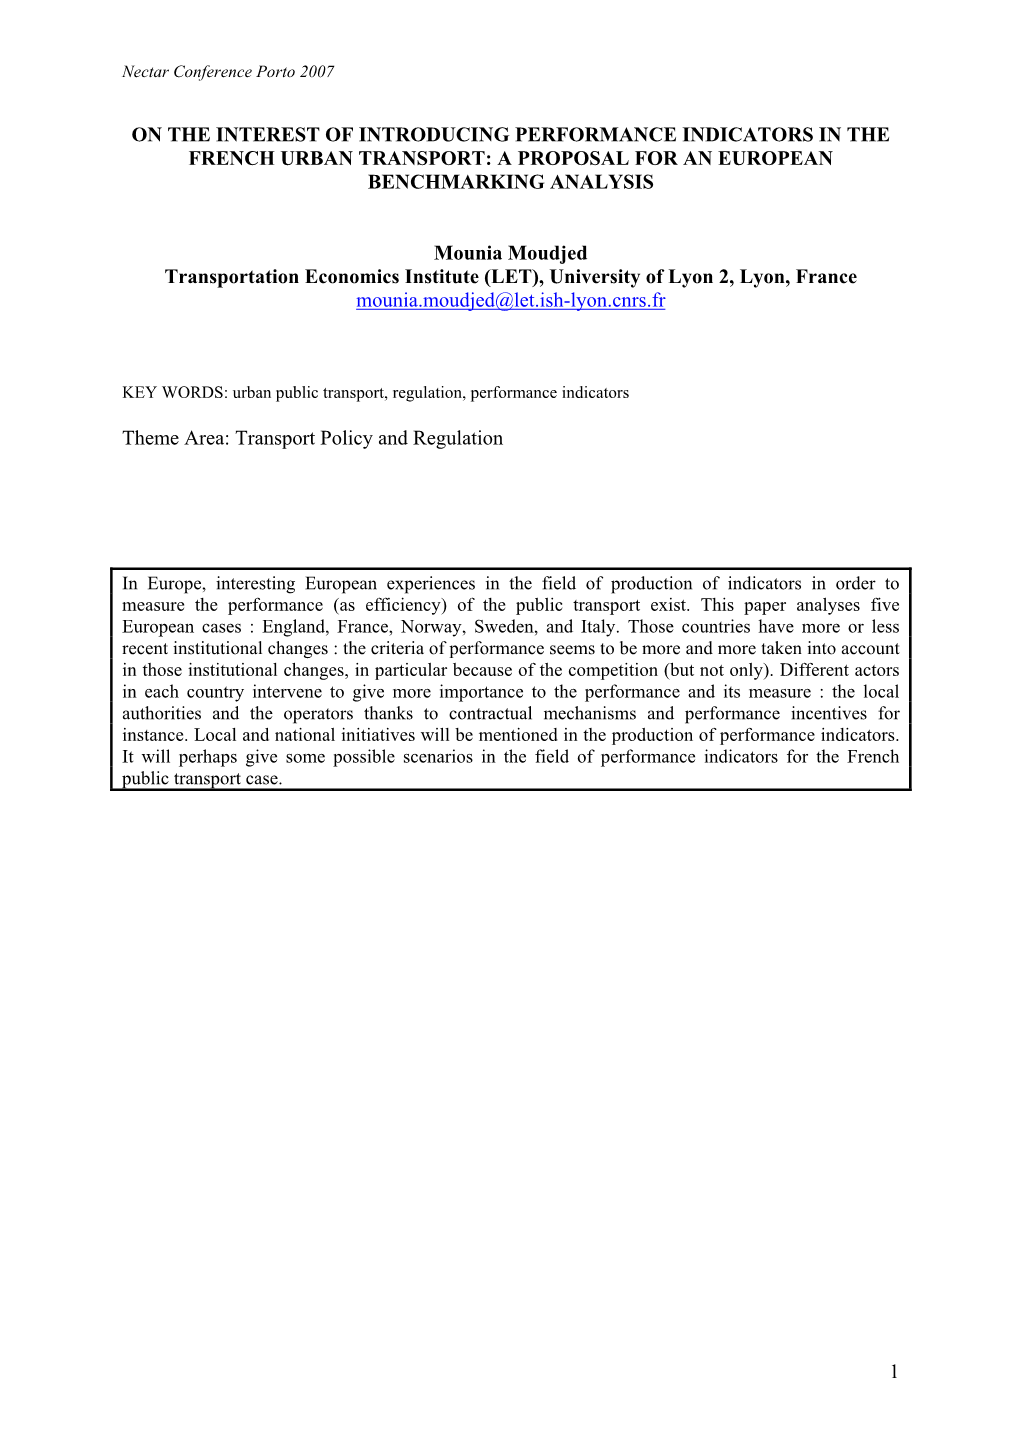 On the Interest of Introducing Performance Indicators in the French Urban Transport: a Proposal for an European Benchmarking Analysis